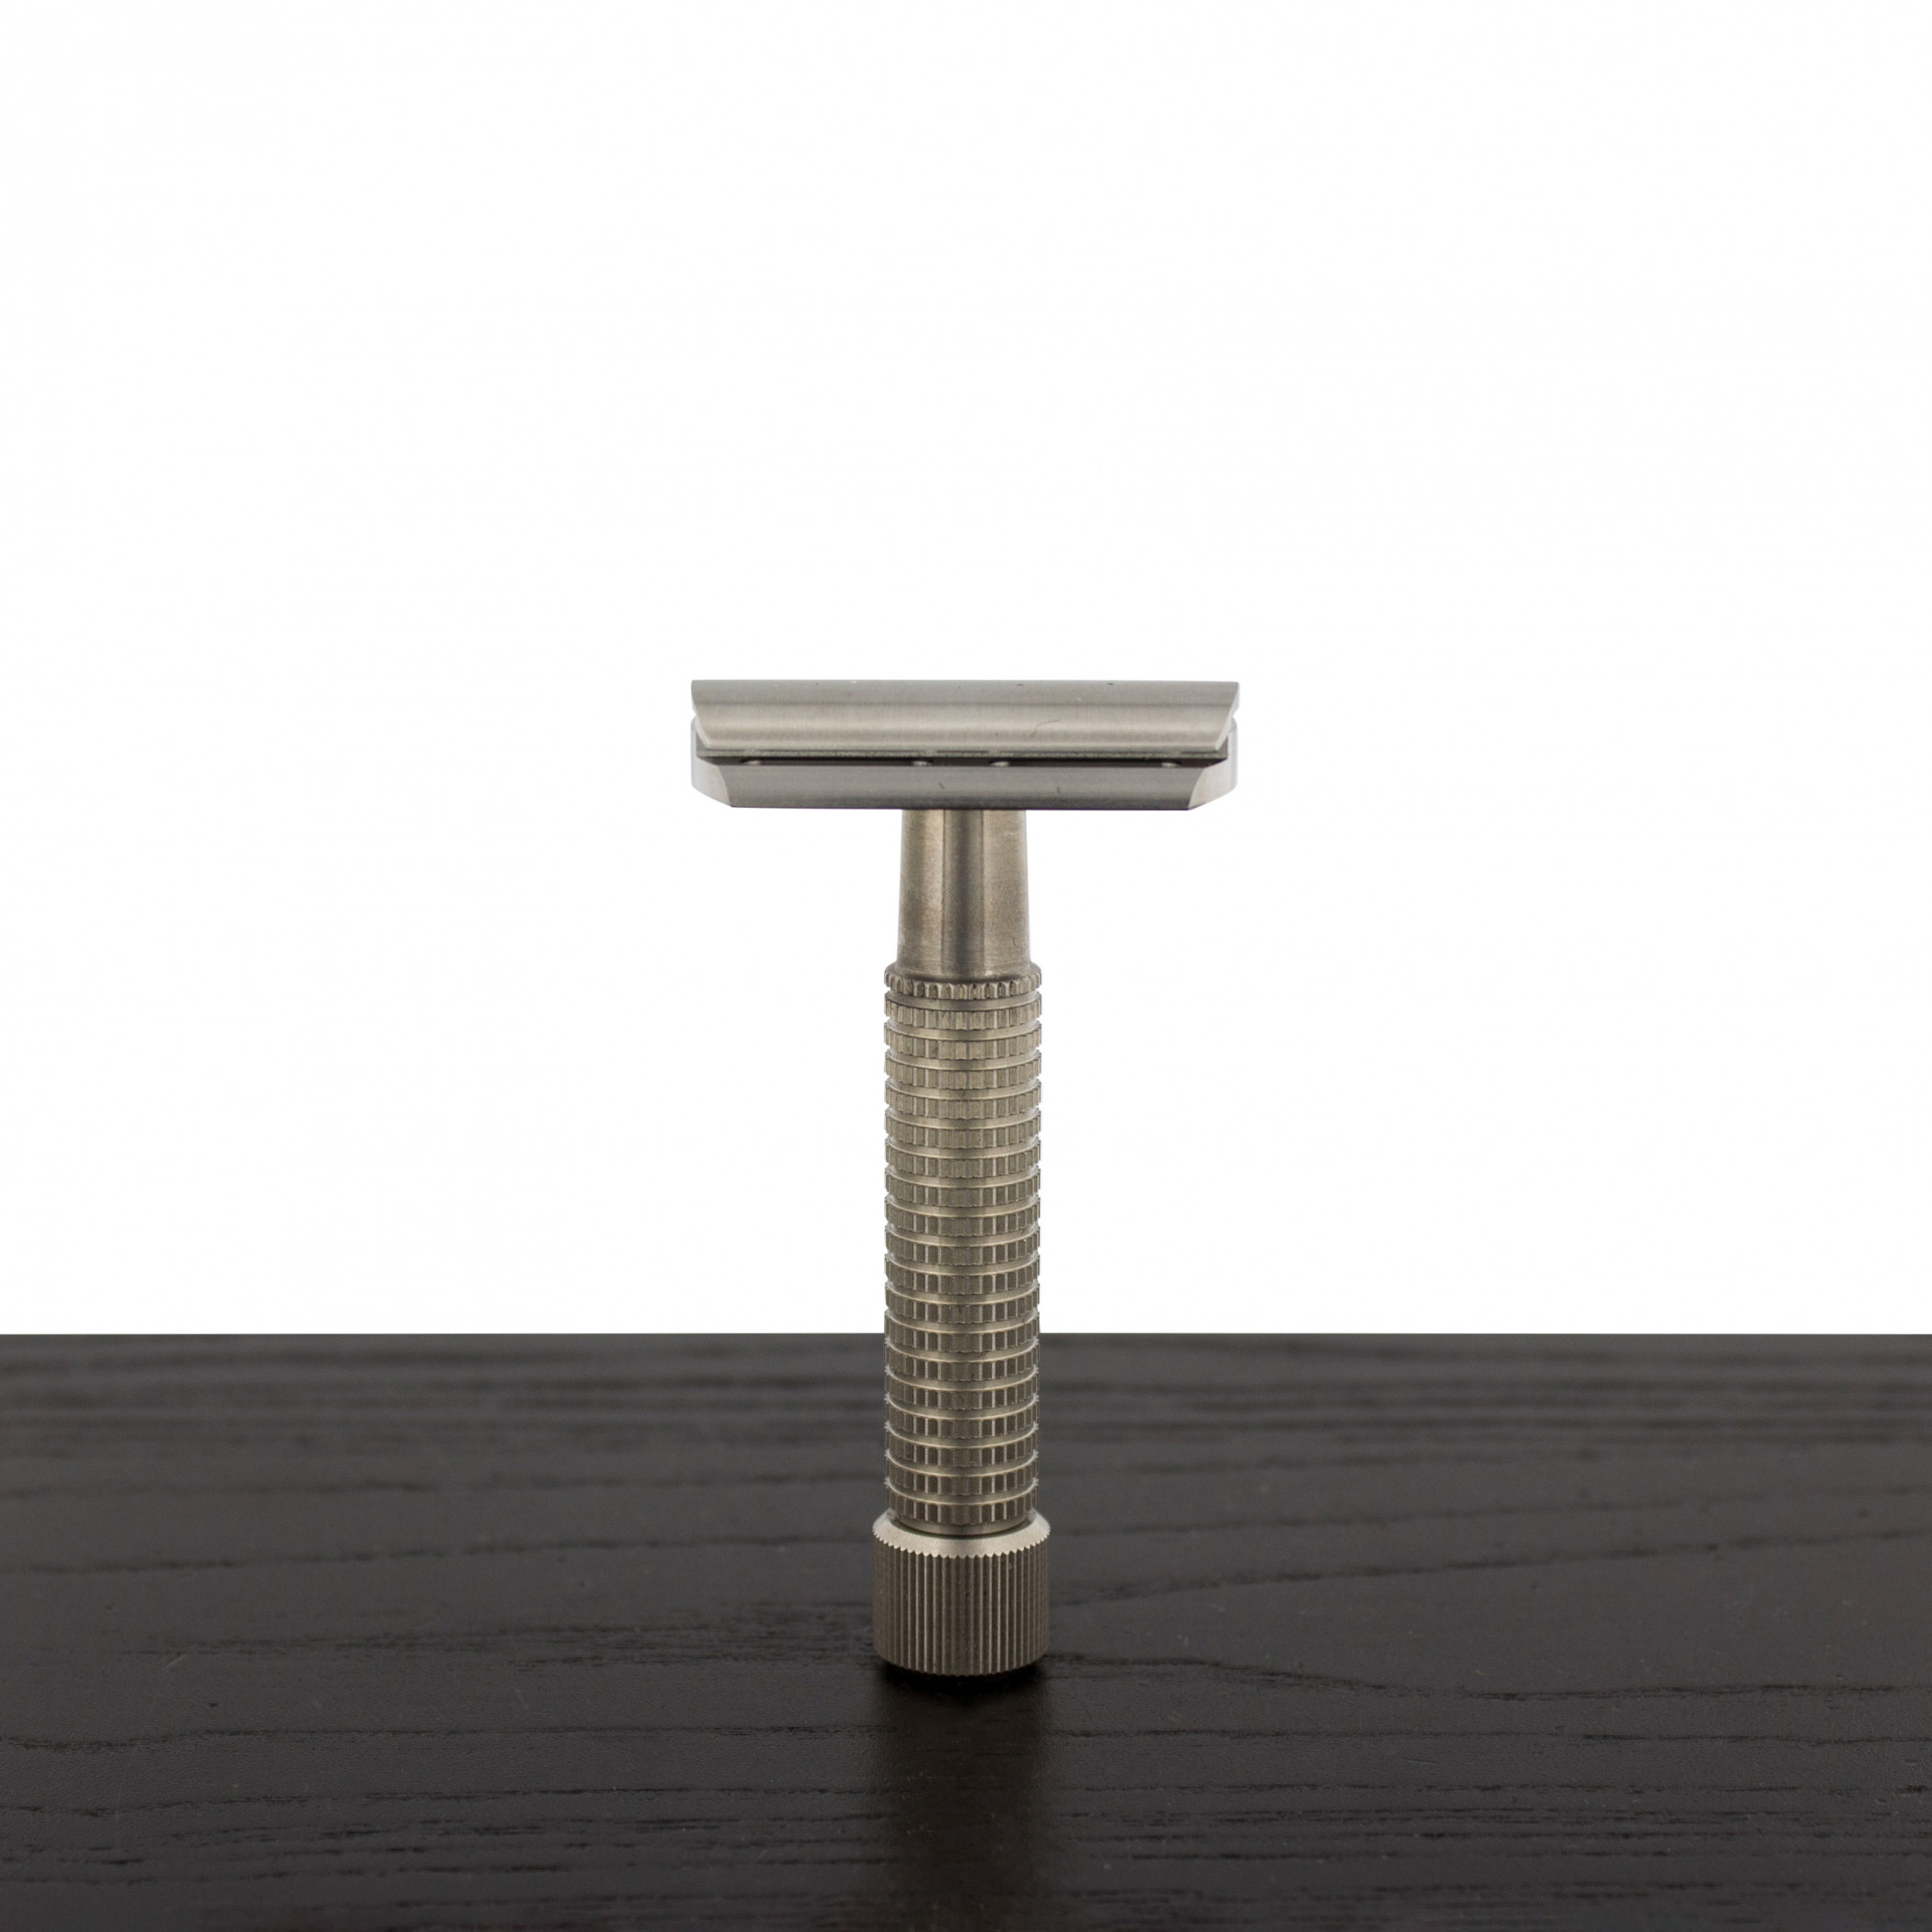 Product image 0 for Rex Supply Co. Envoy Stainless Steel DE Safety Razor